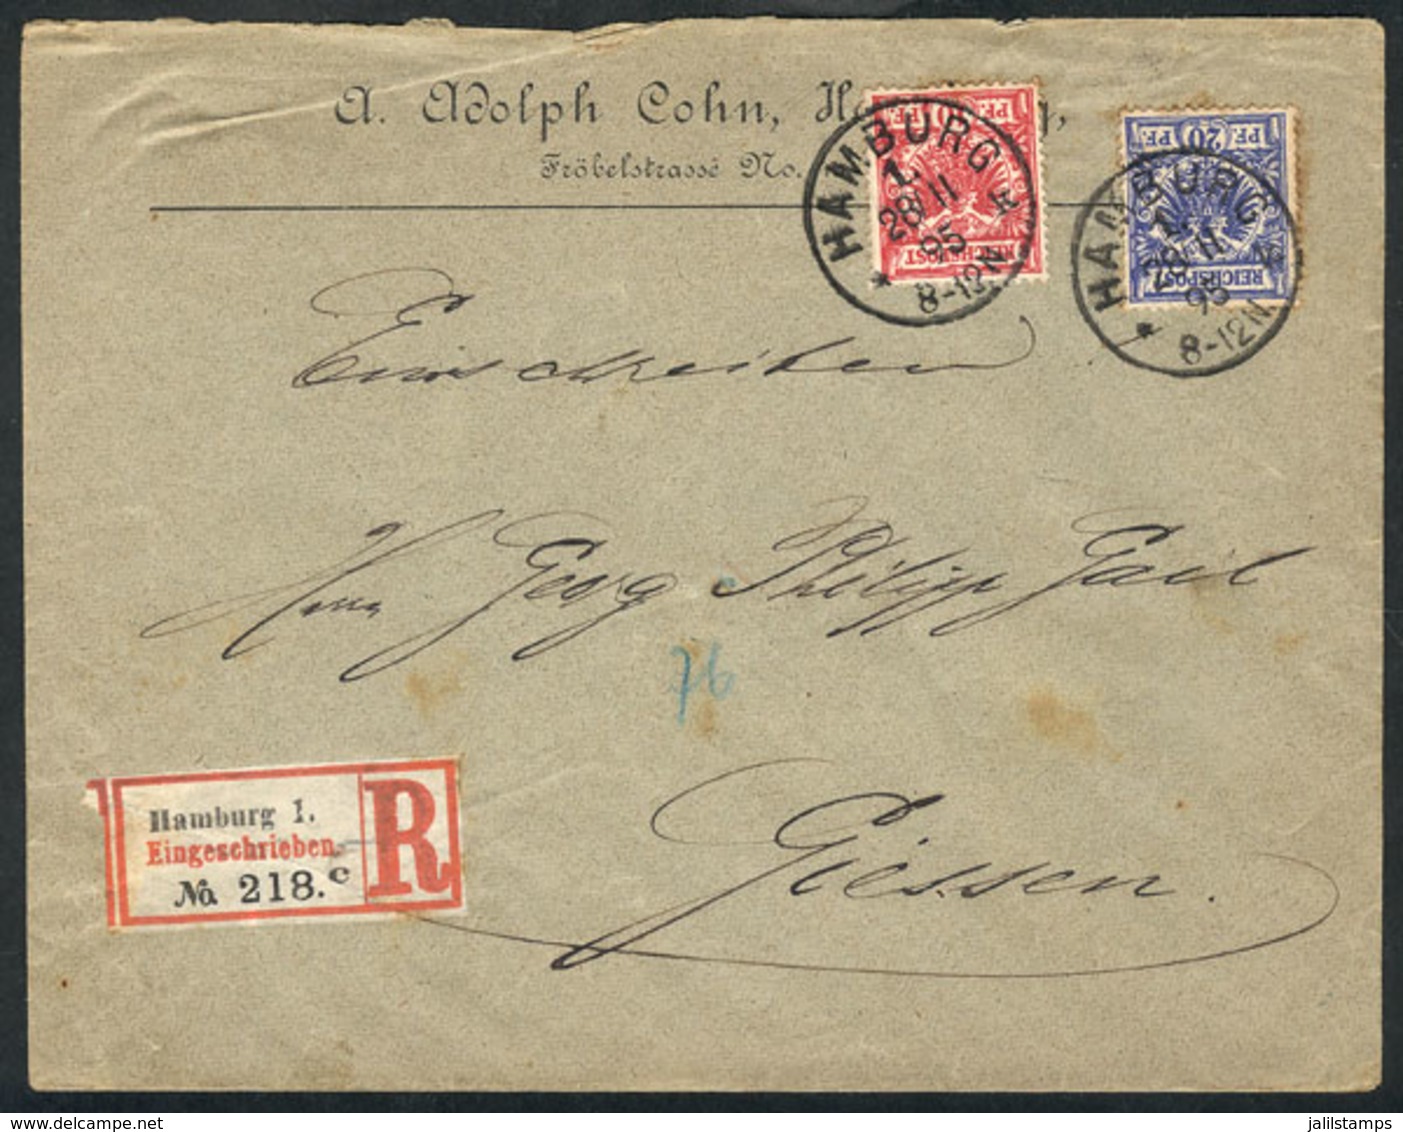 GERMANY: Registered Cover Sent From Hamburg To Giesse On 28/NO/1895 Franked With 30Pf., Very Nice! - Lettres & Documents